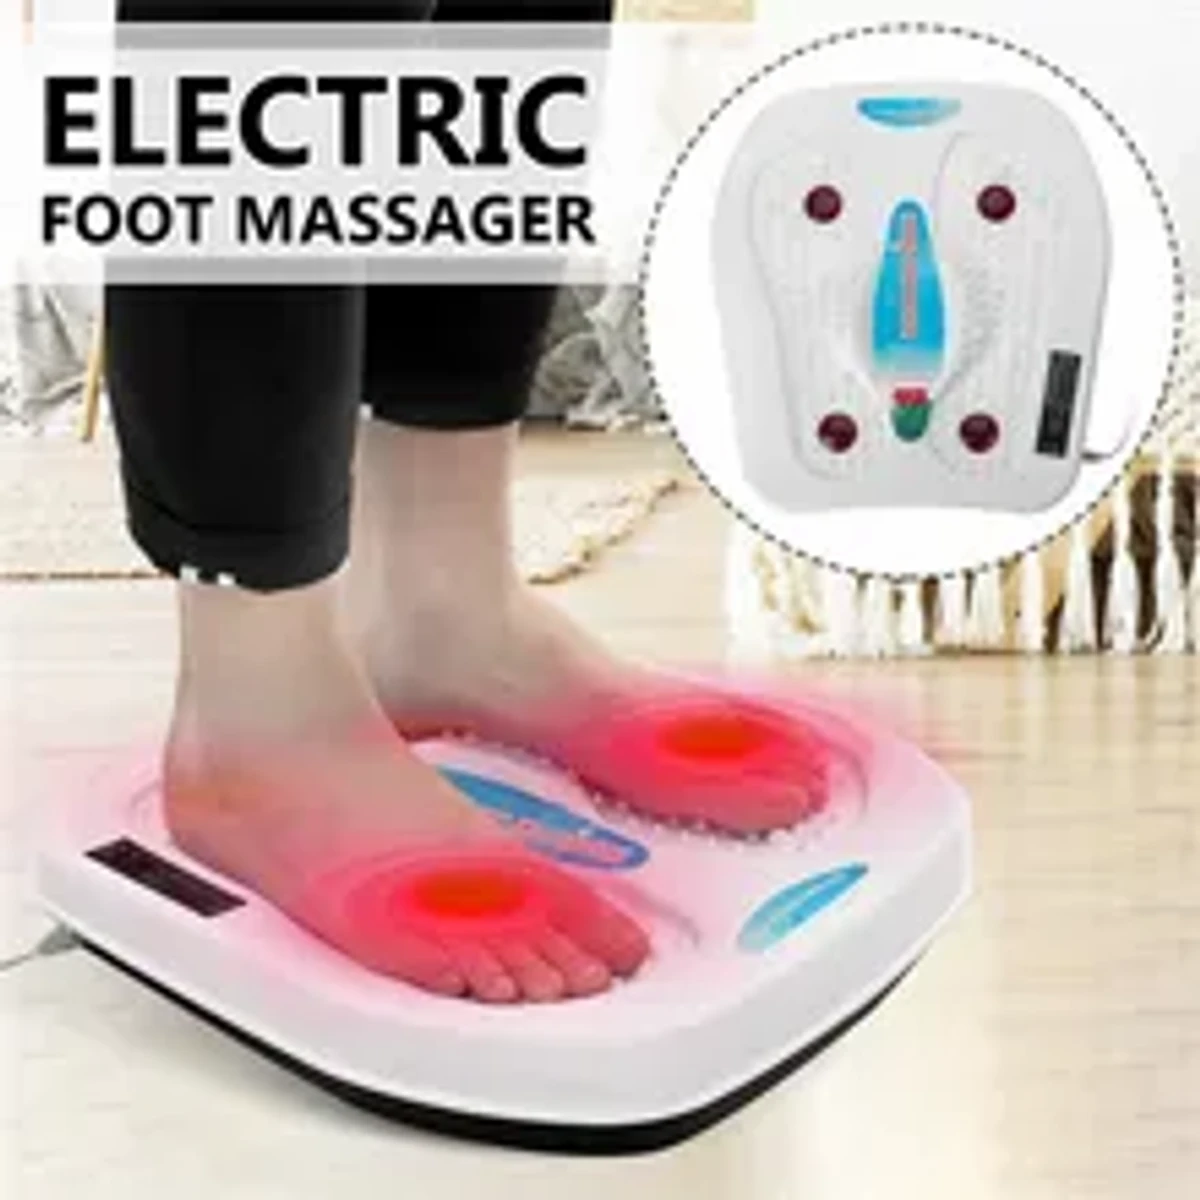 Electric Foot Massager Machine Vibration Massage Infrared Heating Therapy Leg Spa Relieve Fatigue